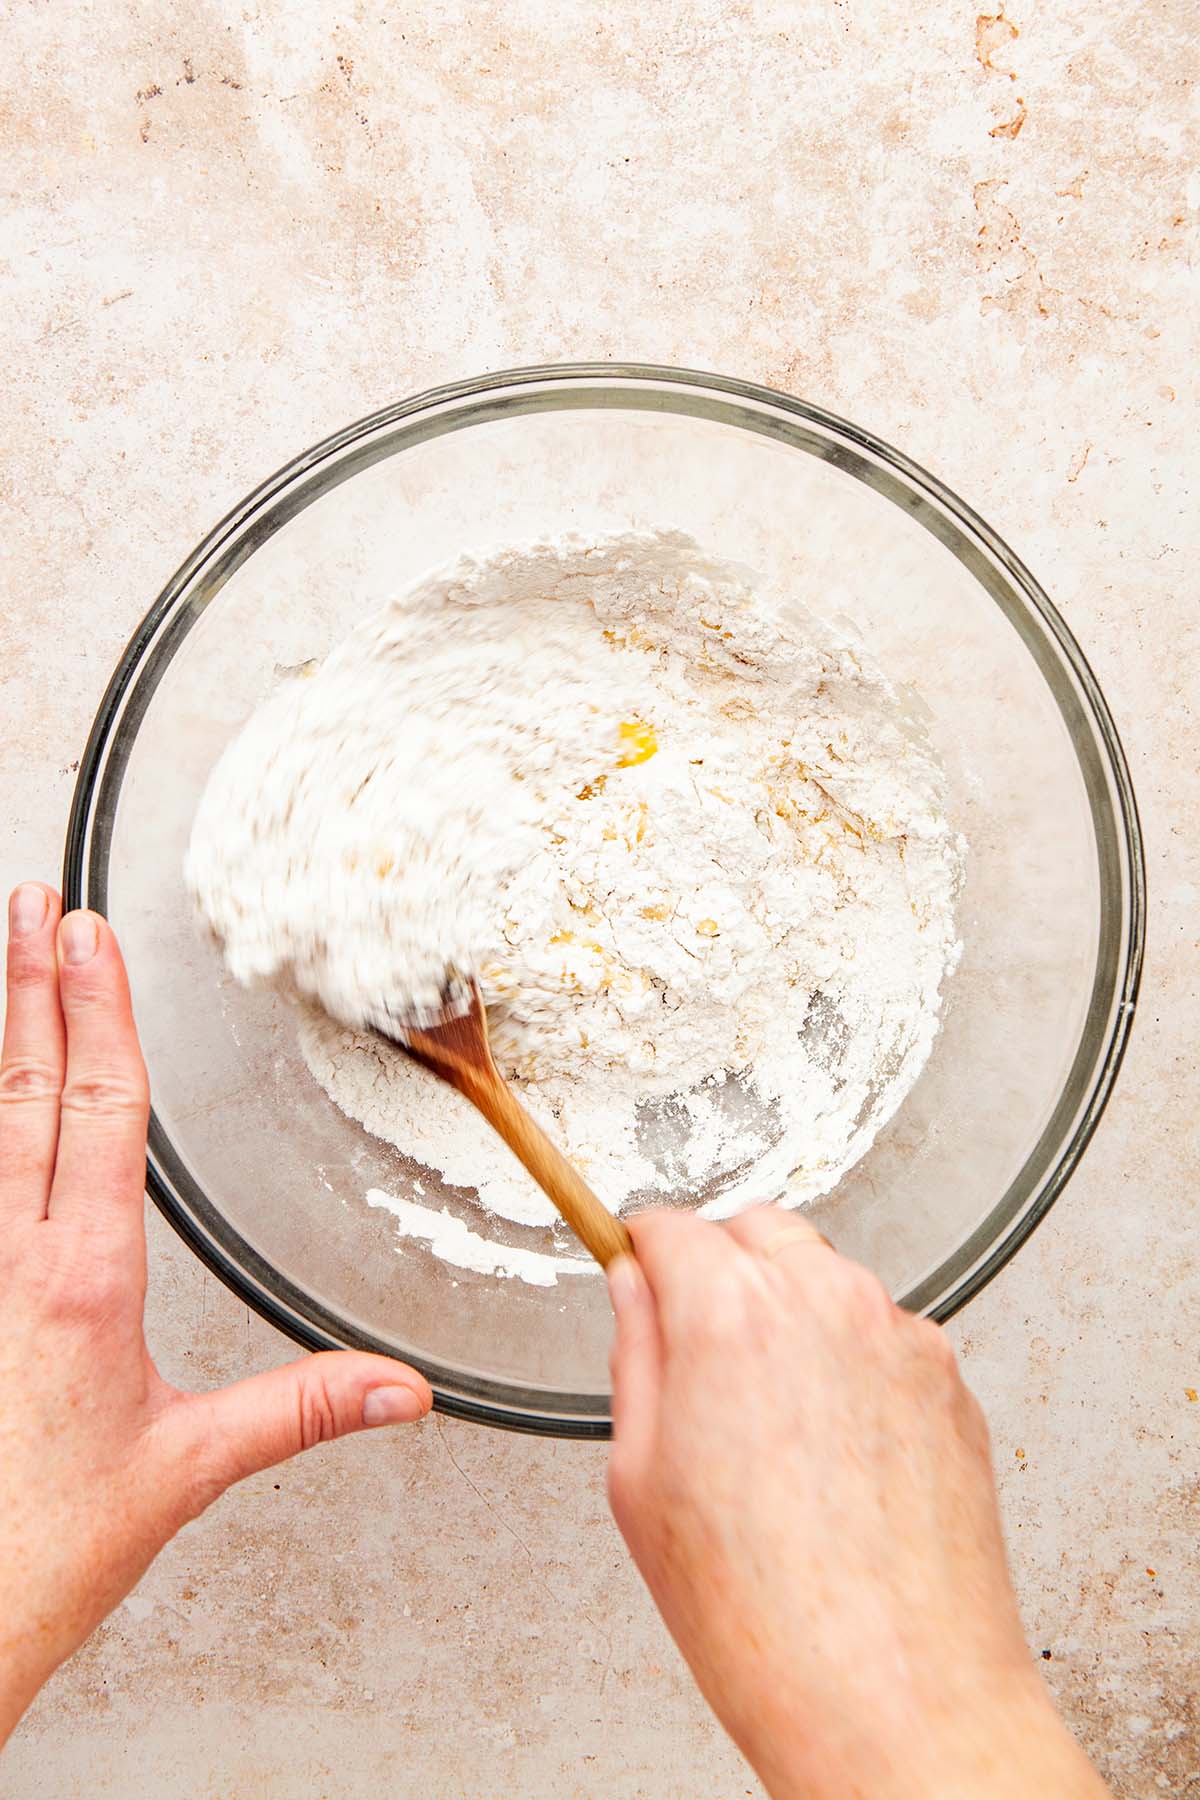 A hand mixing melted butter into flour in a glass bowl using a wooden spoon.